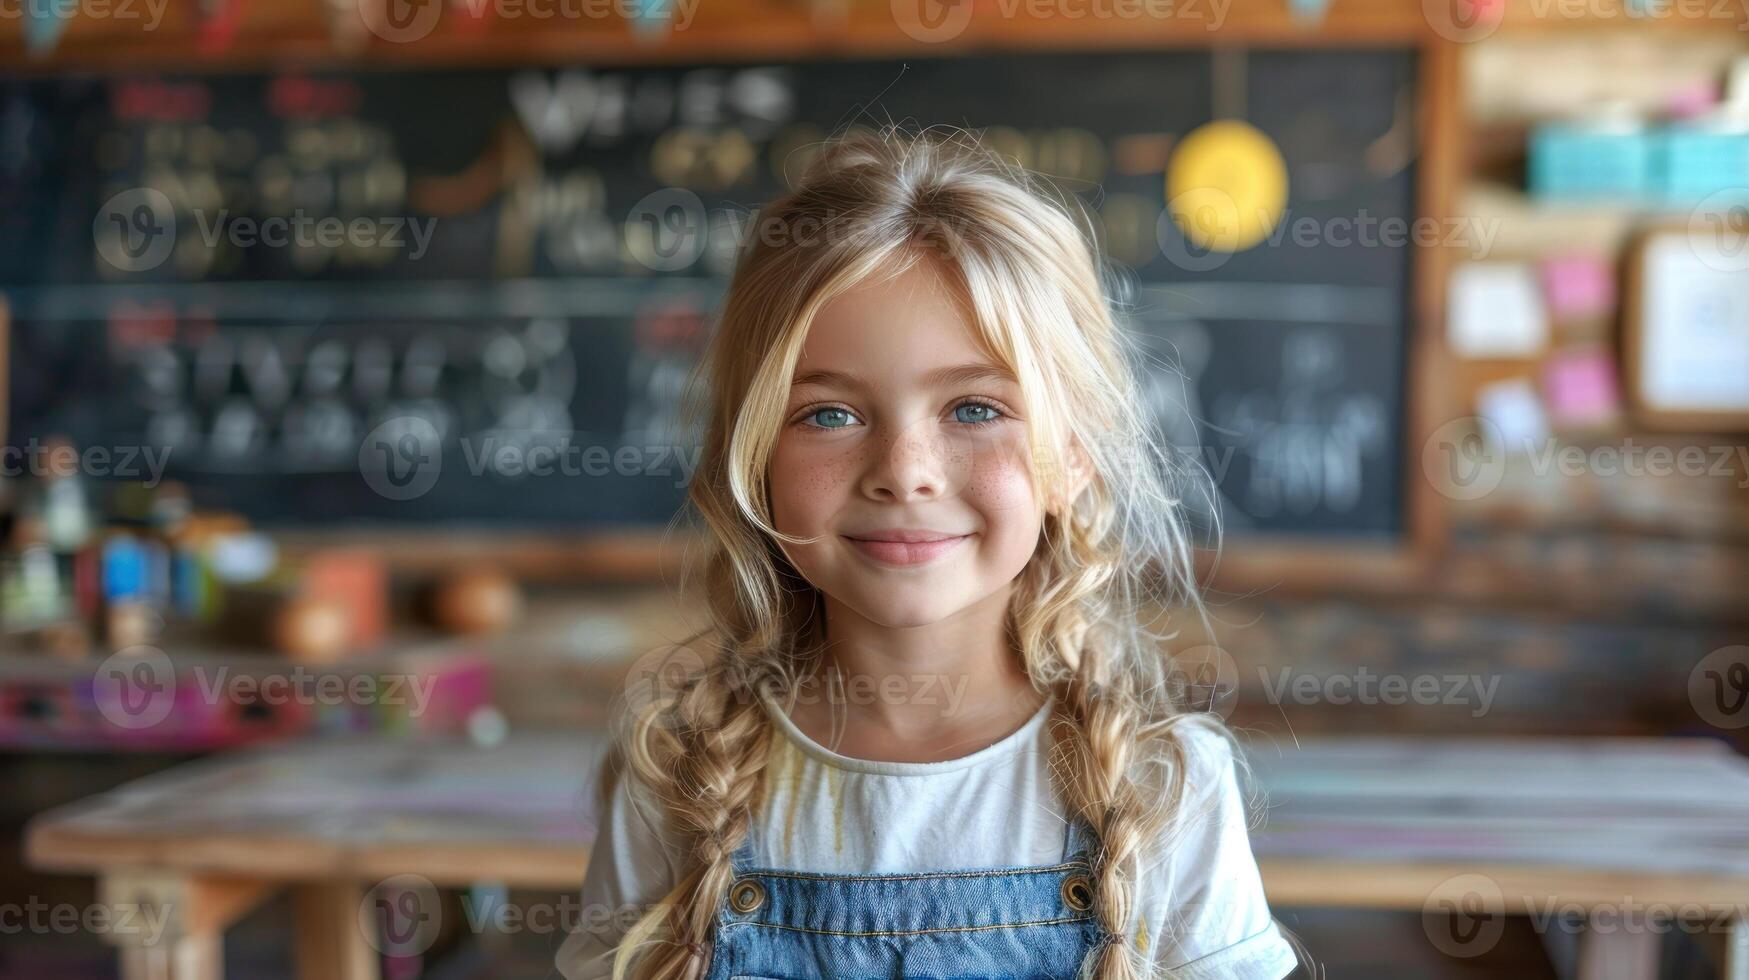 Young child standing near a chalkboard, possibly in a classroom or school setting photo